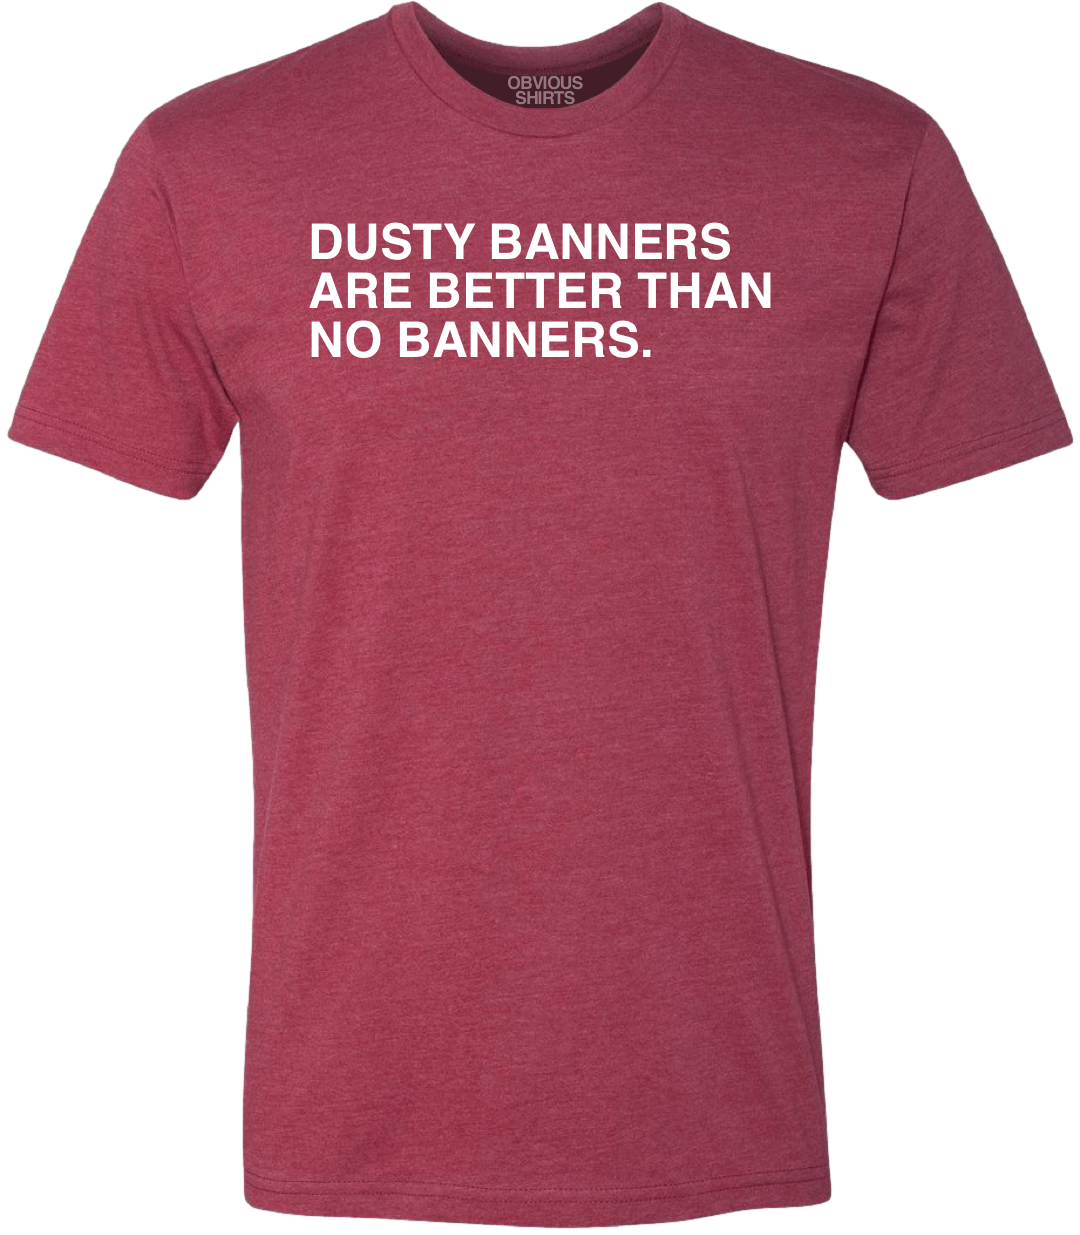 DUSTY BANNERS ARE BETTER THAN NO BANNERS. - OBVIOUS SHIRTS